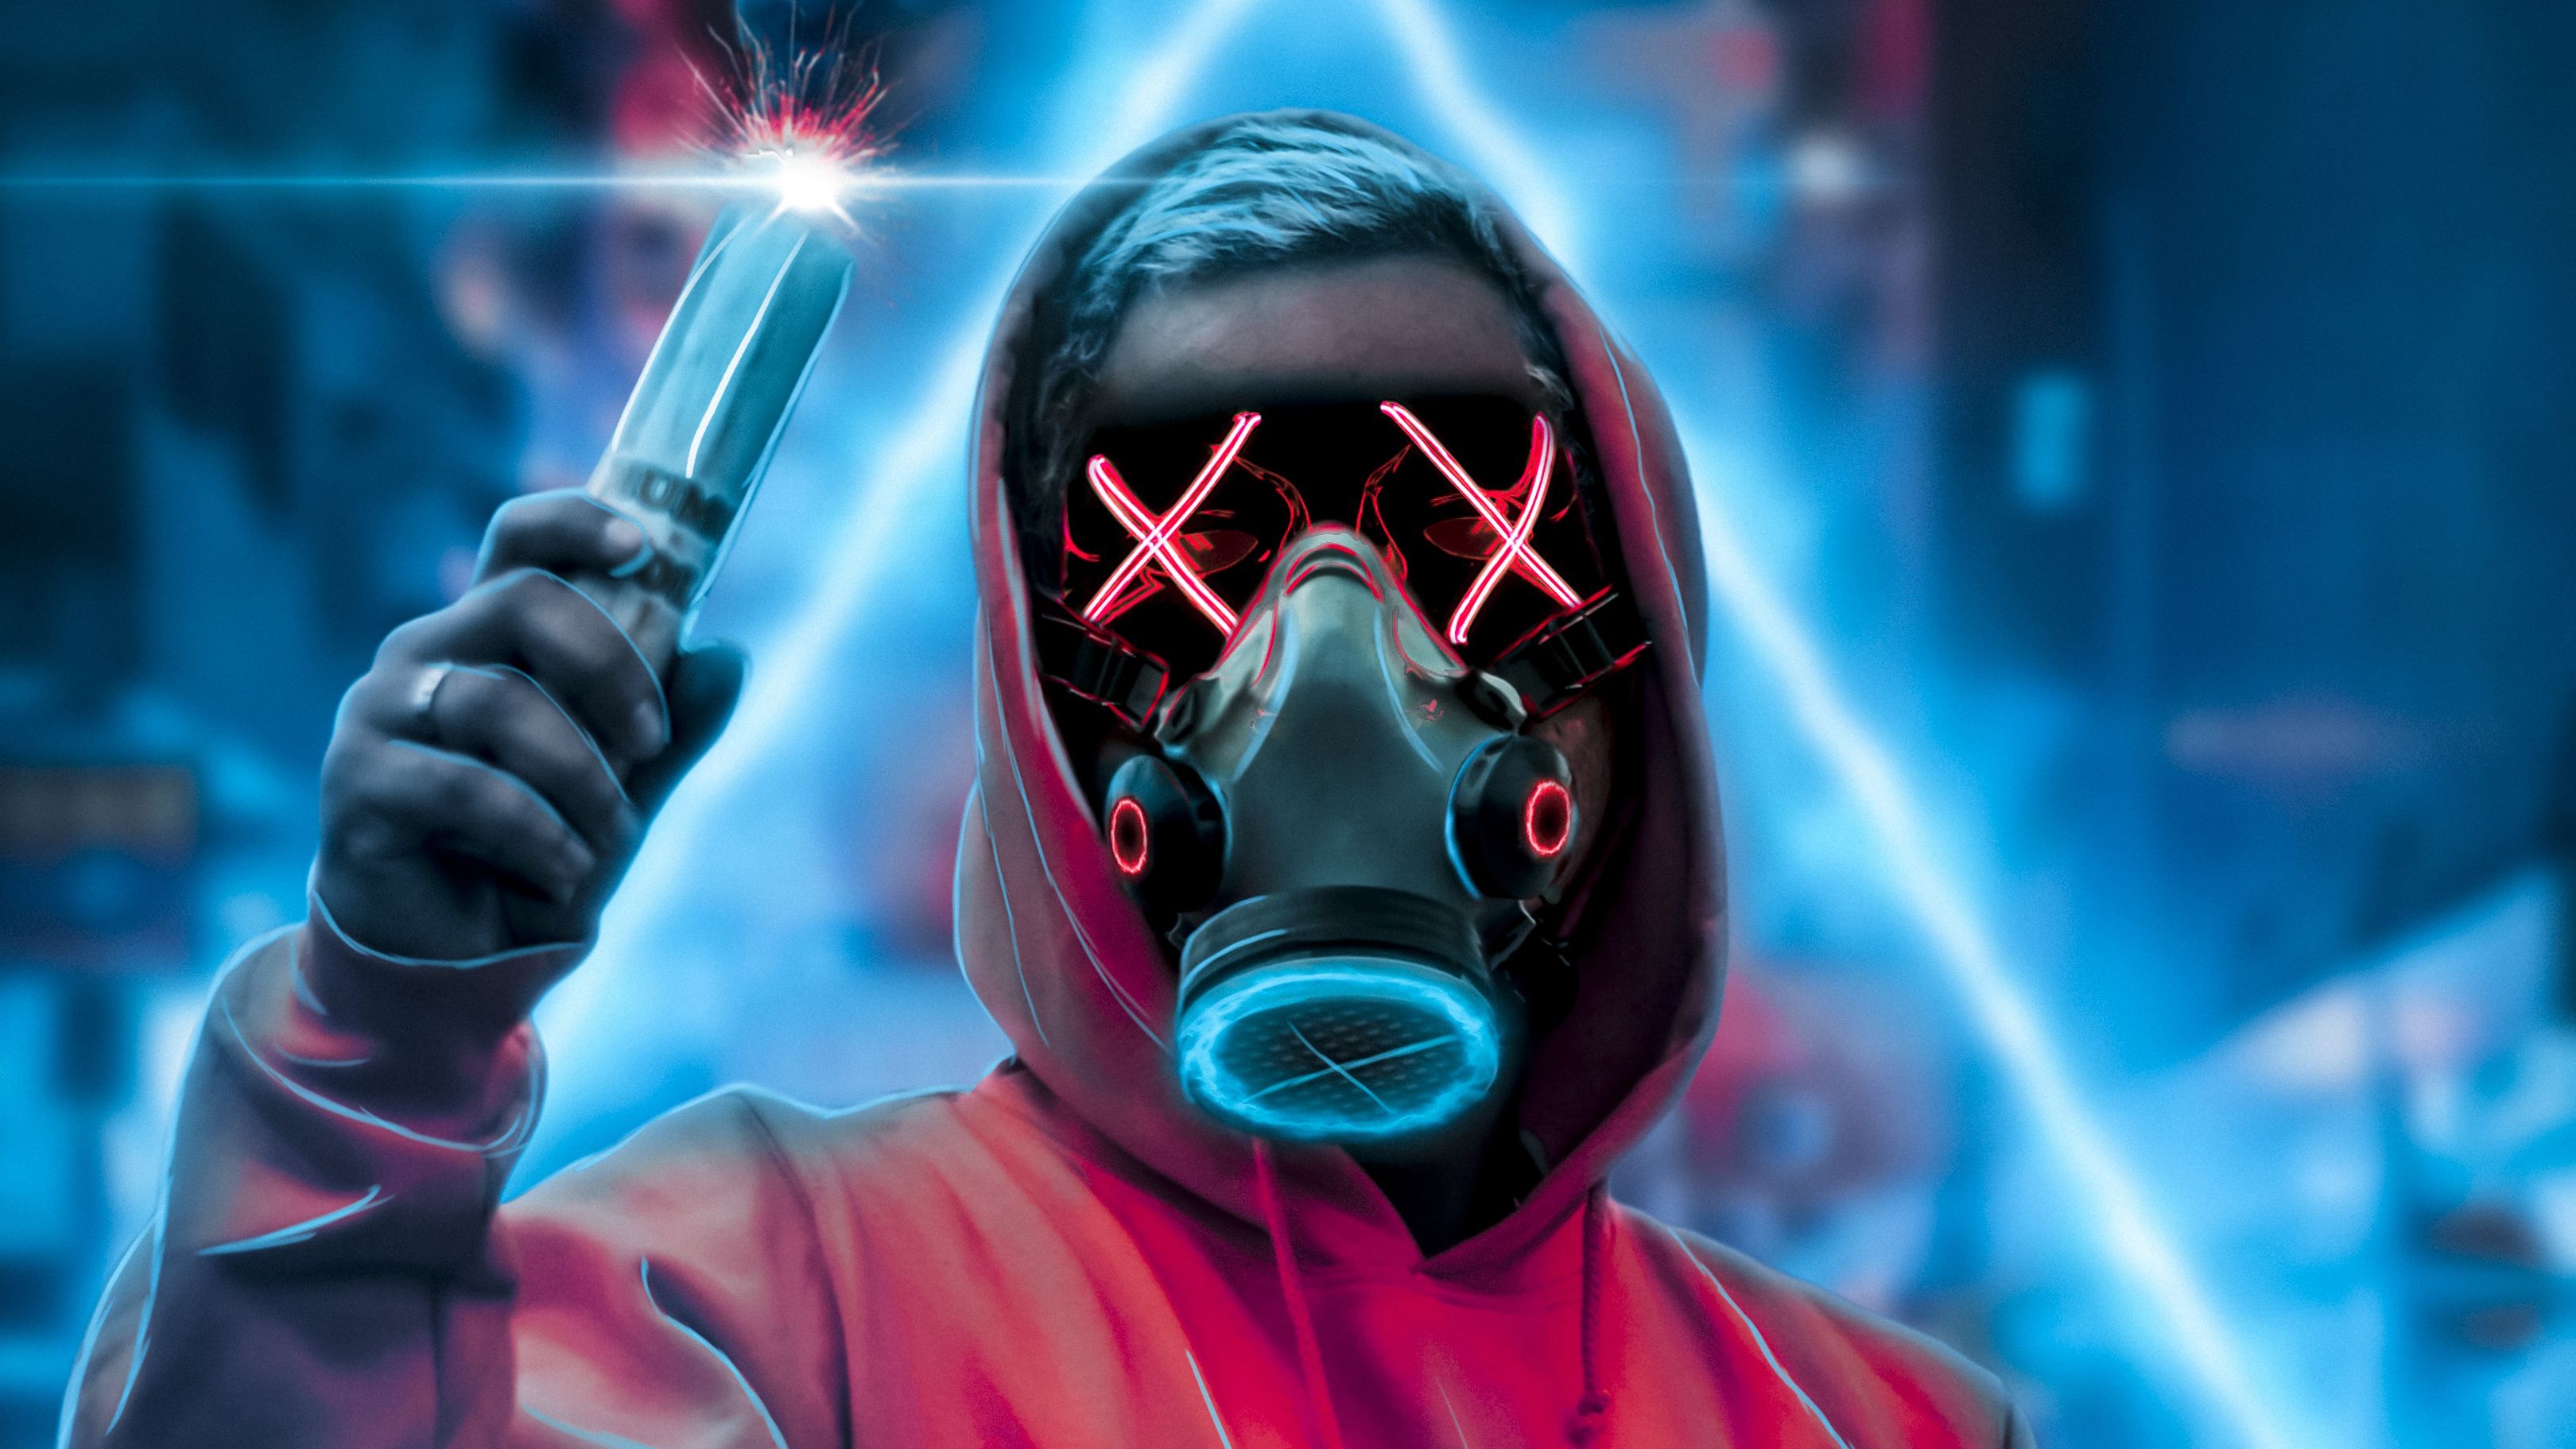 Face Mask Smoke Bomb 4k, HD Artist, 4k Wallpaper, Image, Background, Photo and Picture